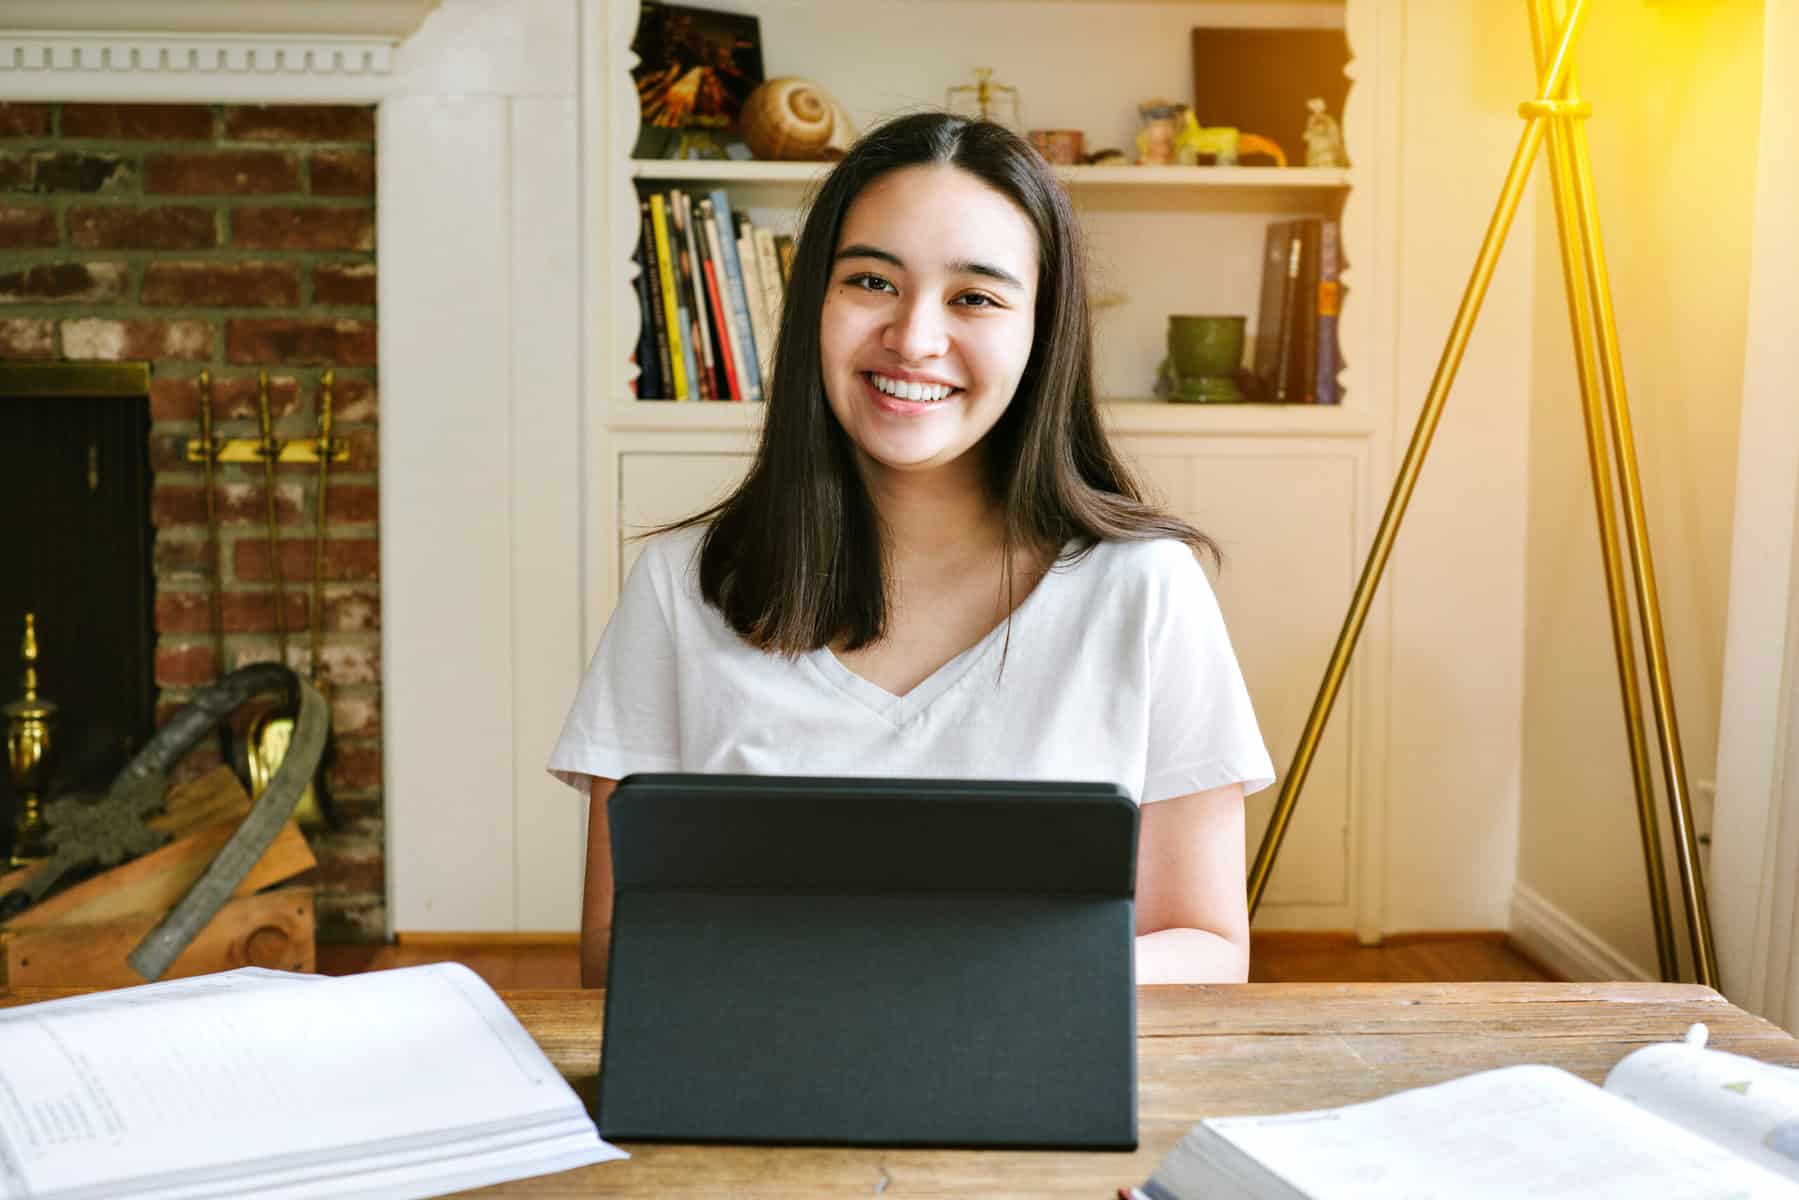 Young woman smiling at a laptop